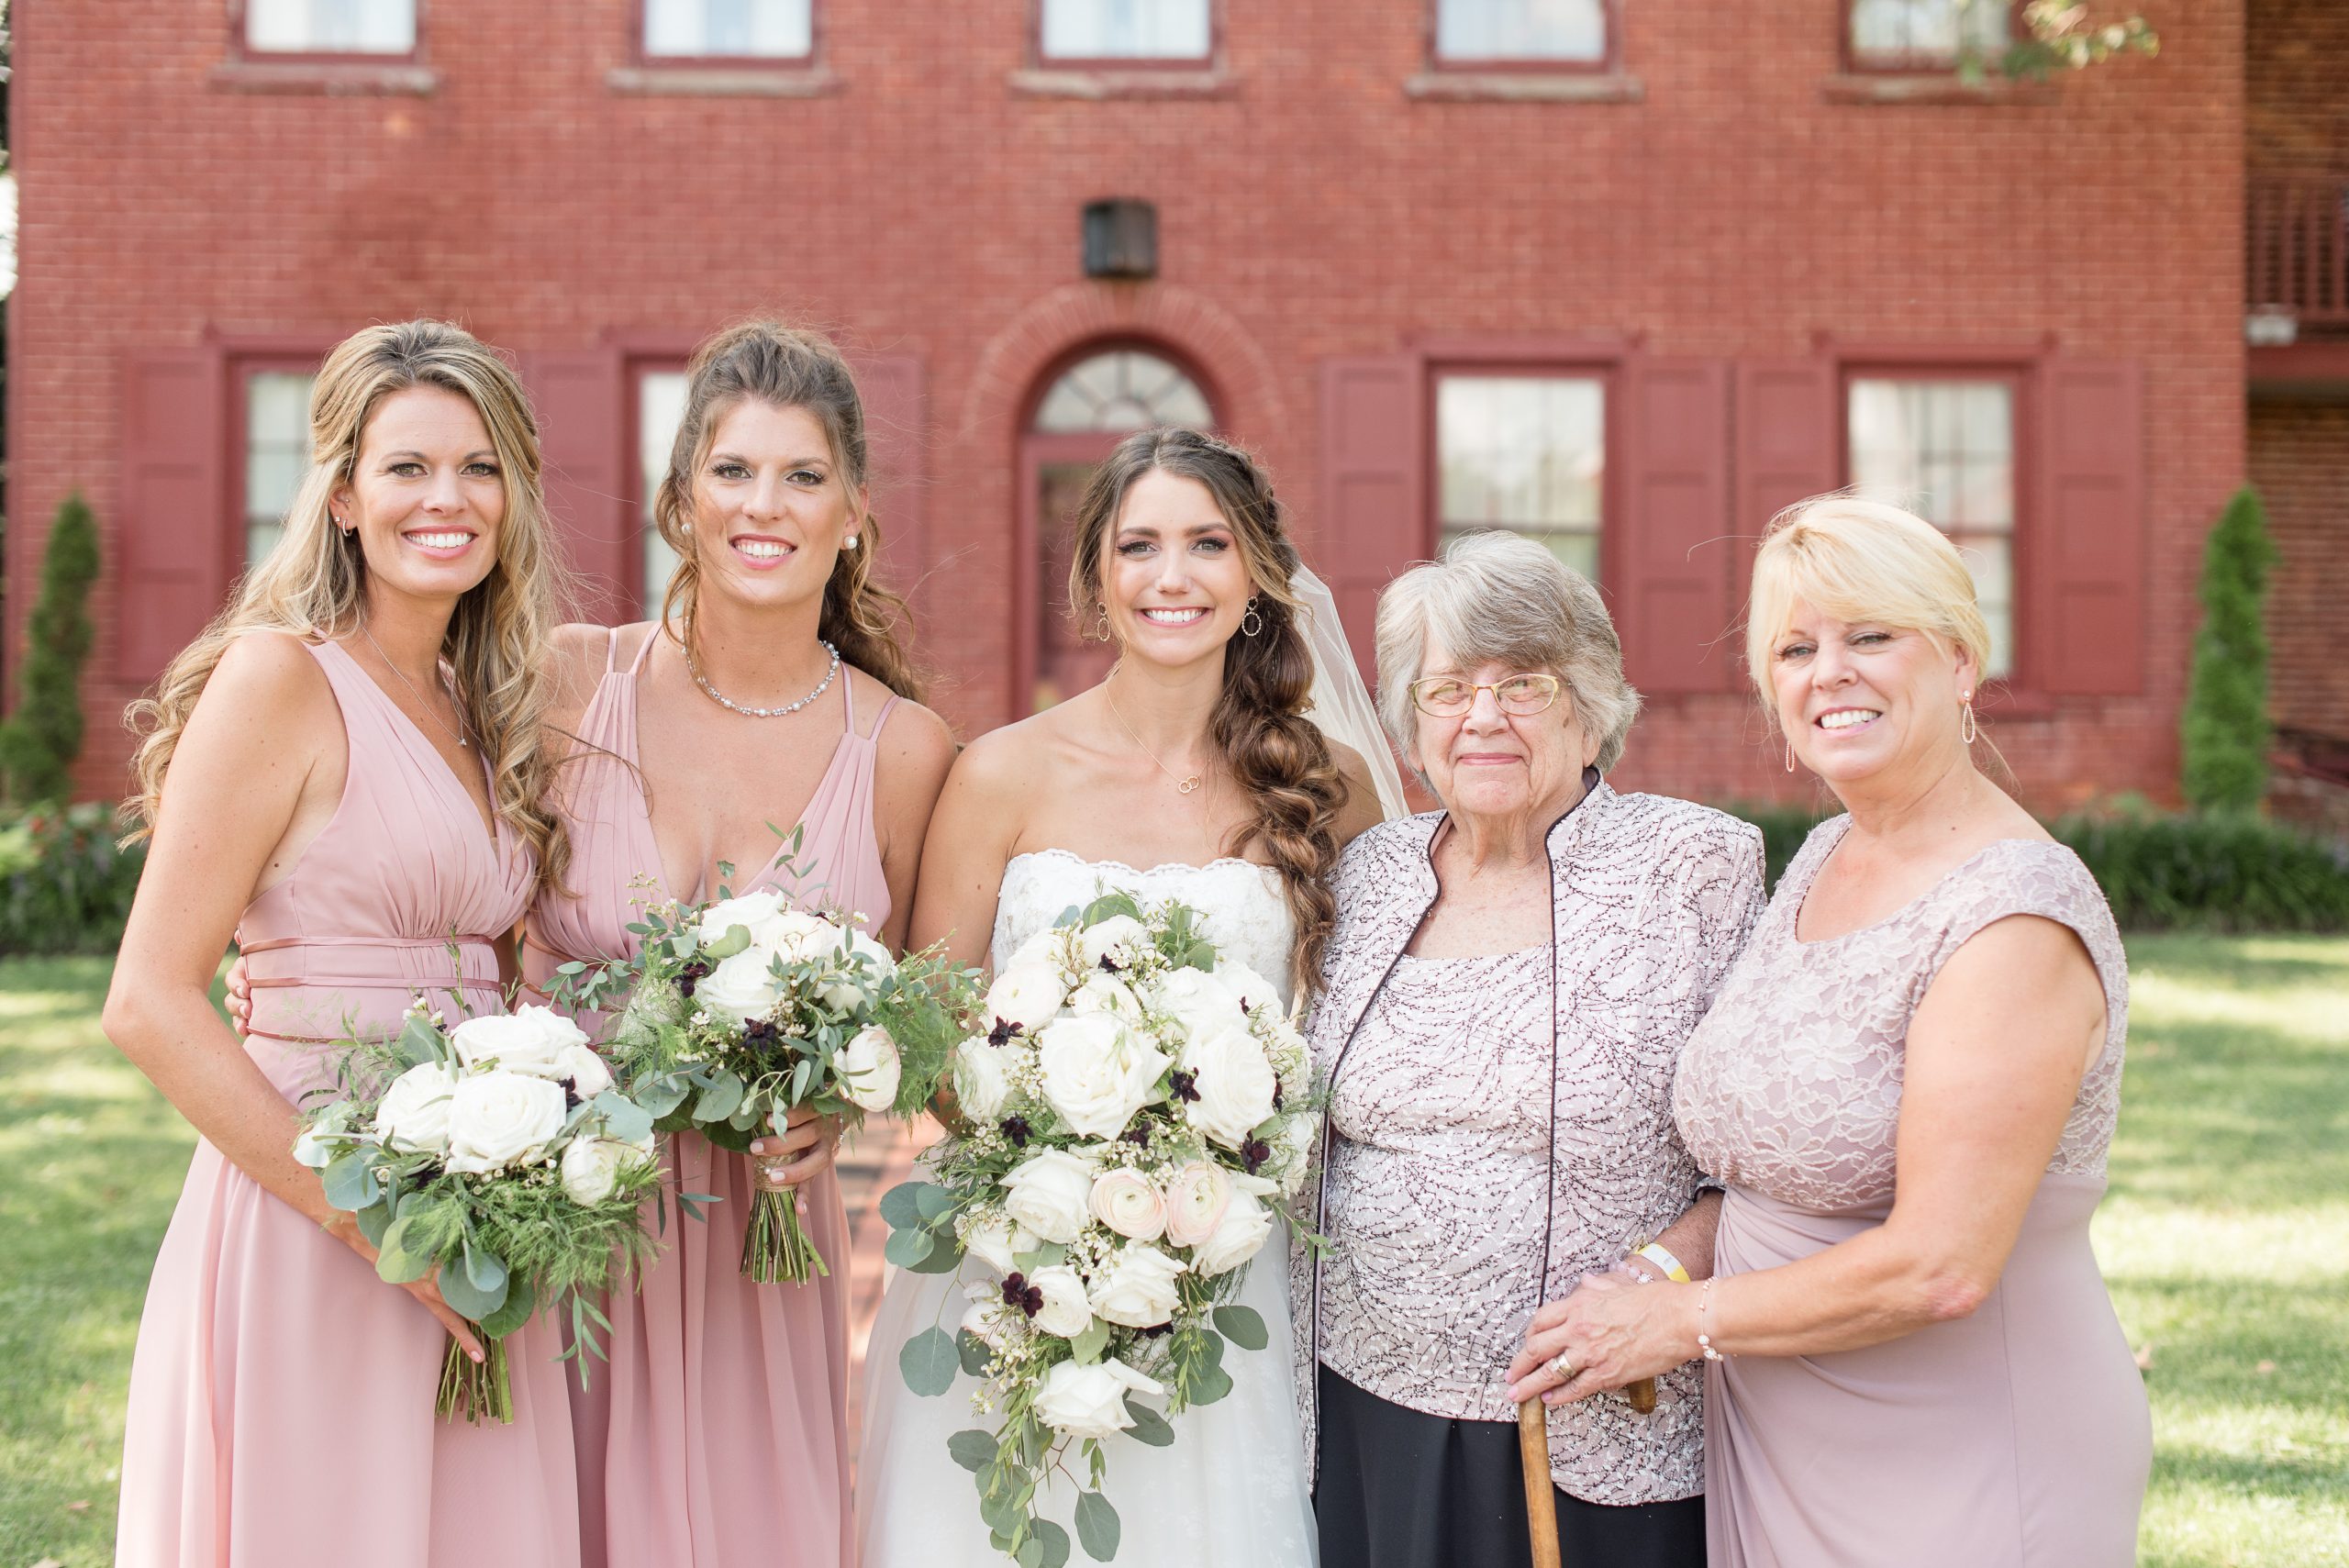 family formal of three generations of women in family in front of brick house